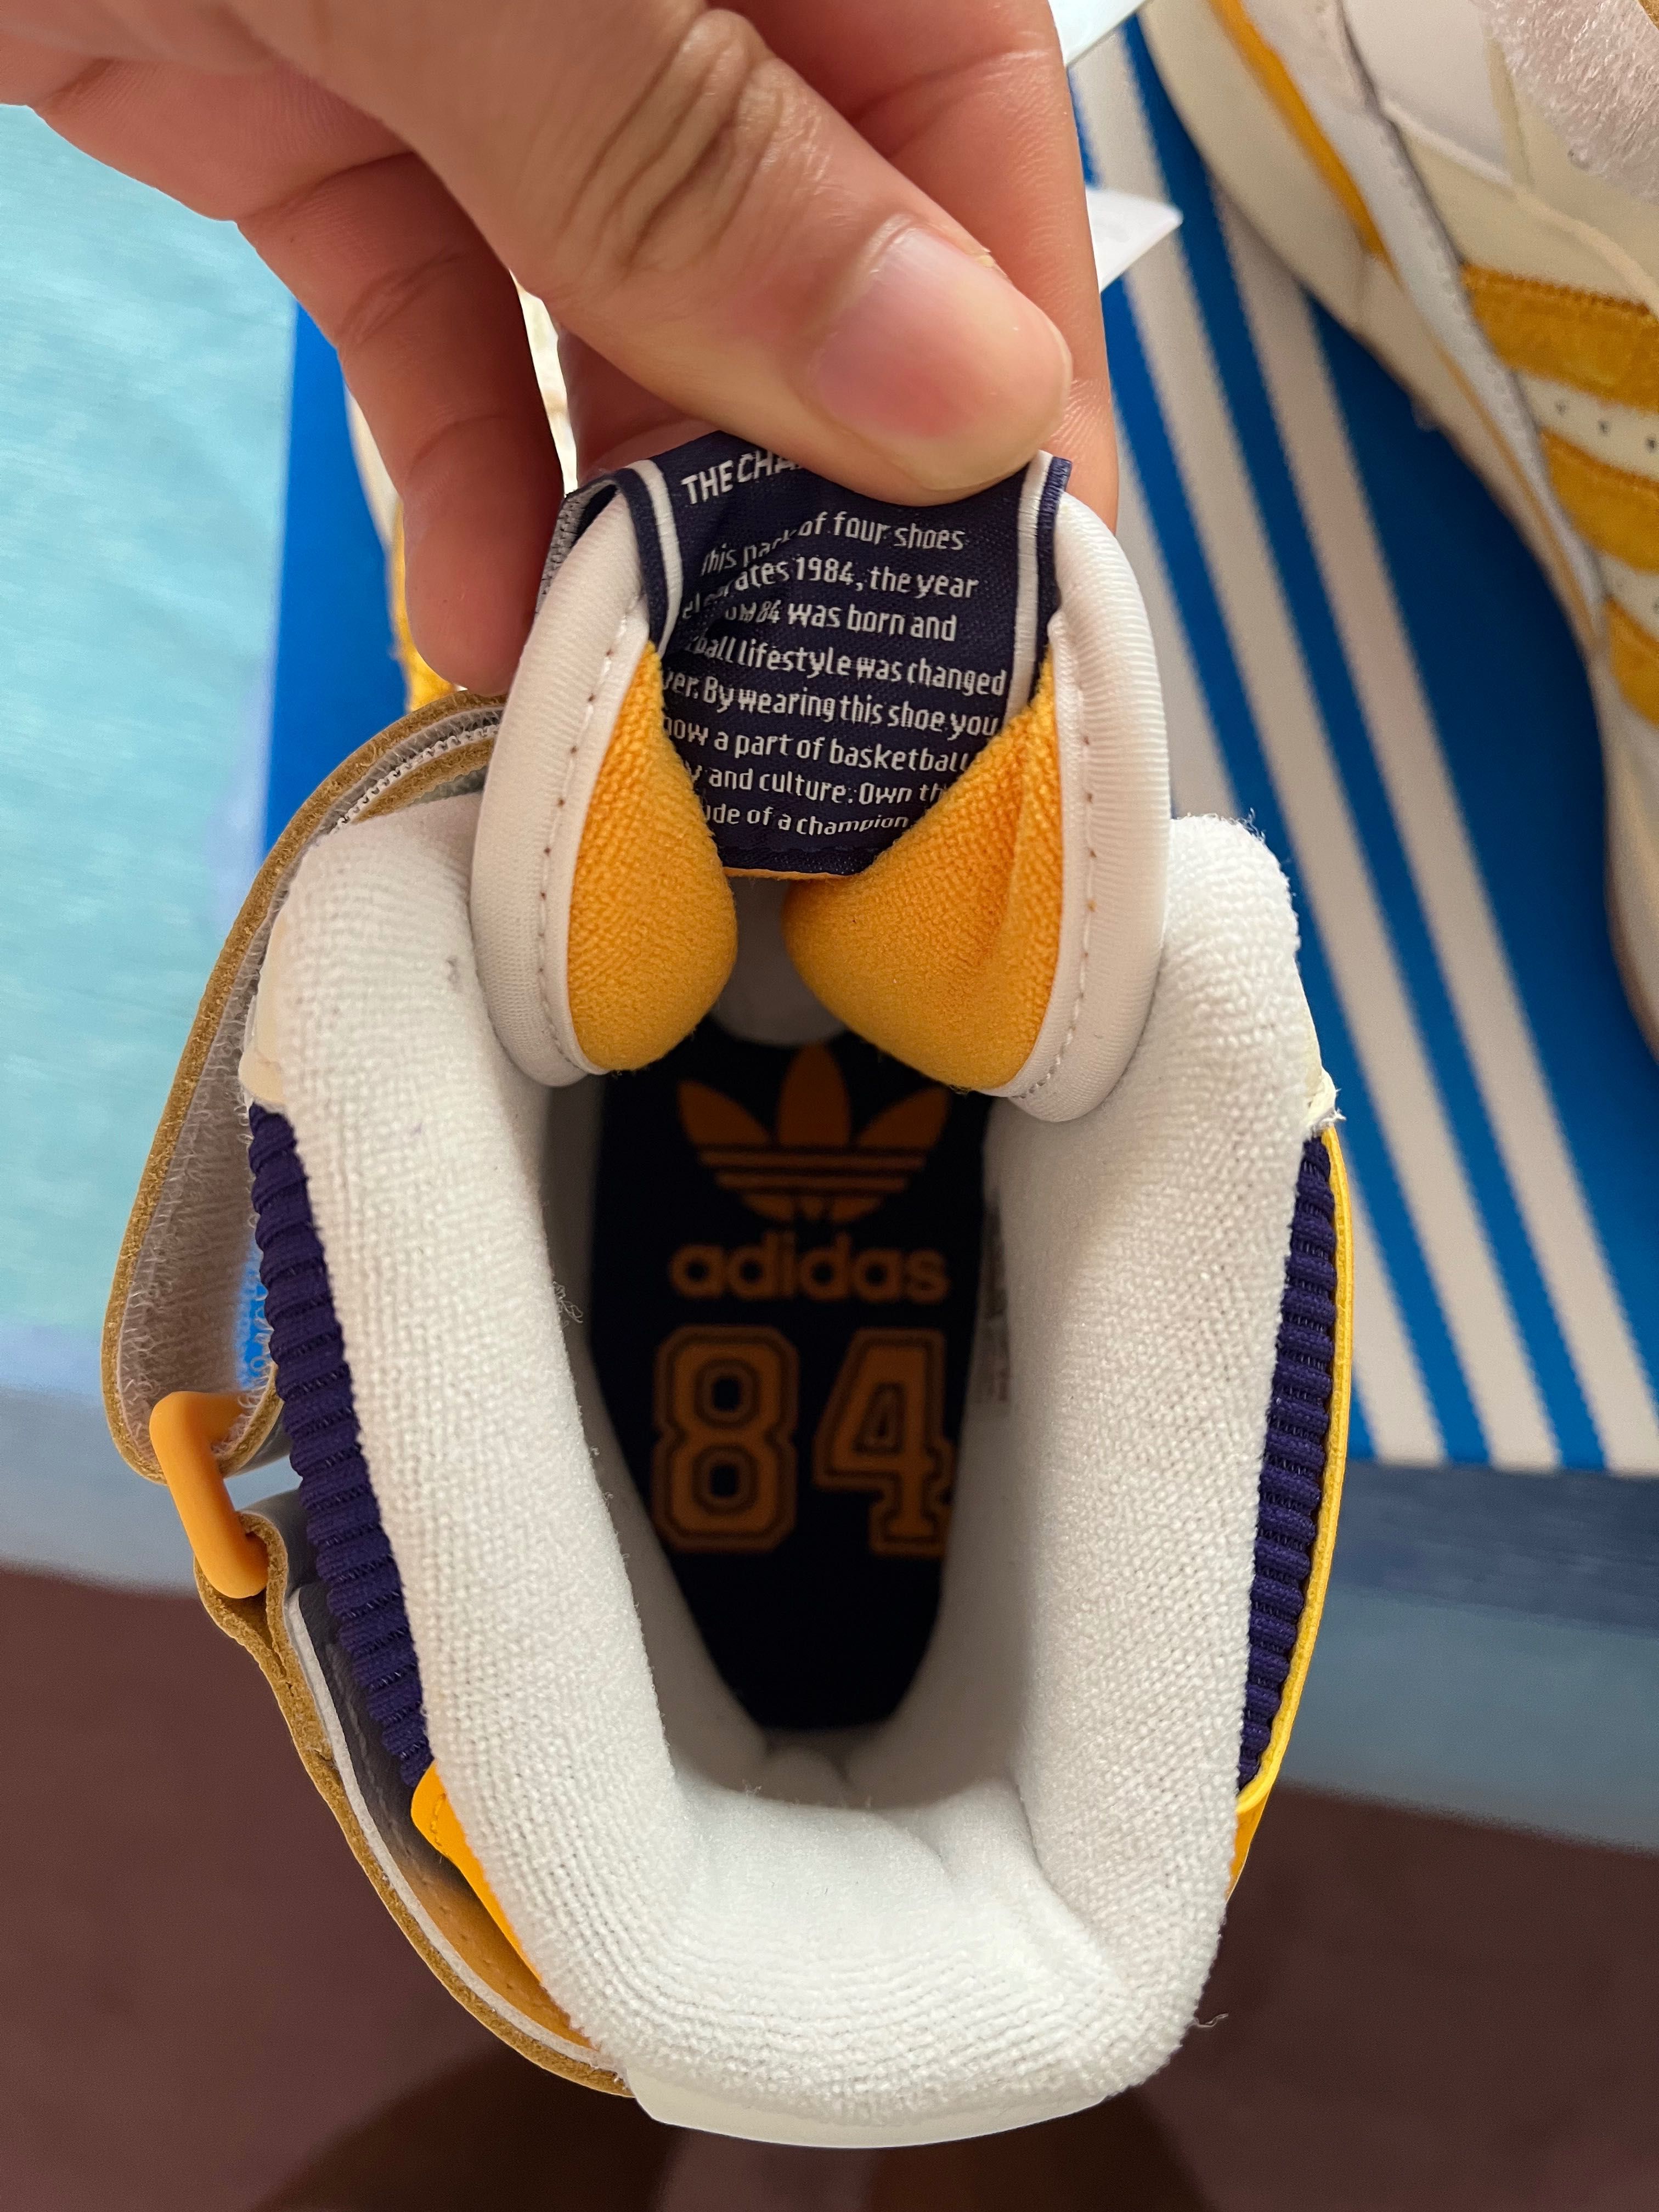 Adidas forum high 84 lakers